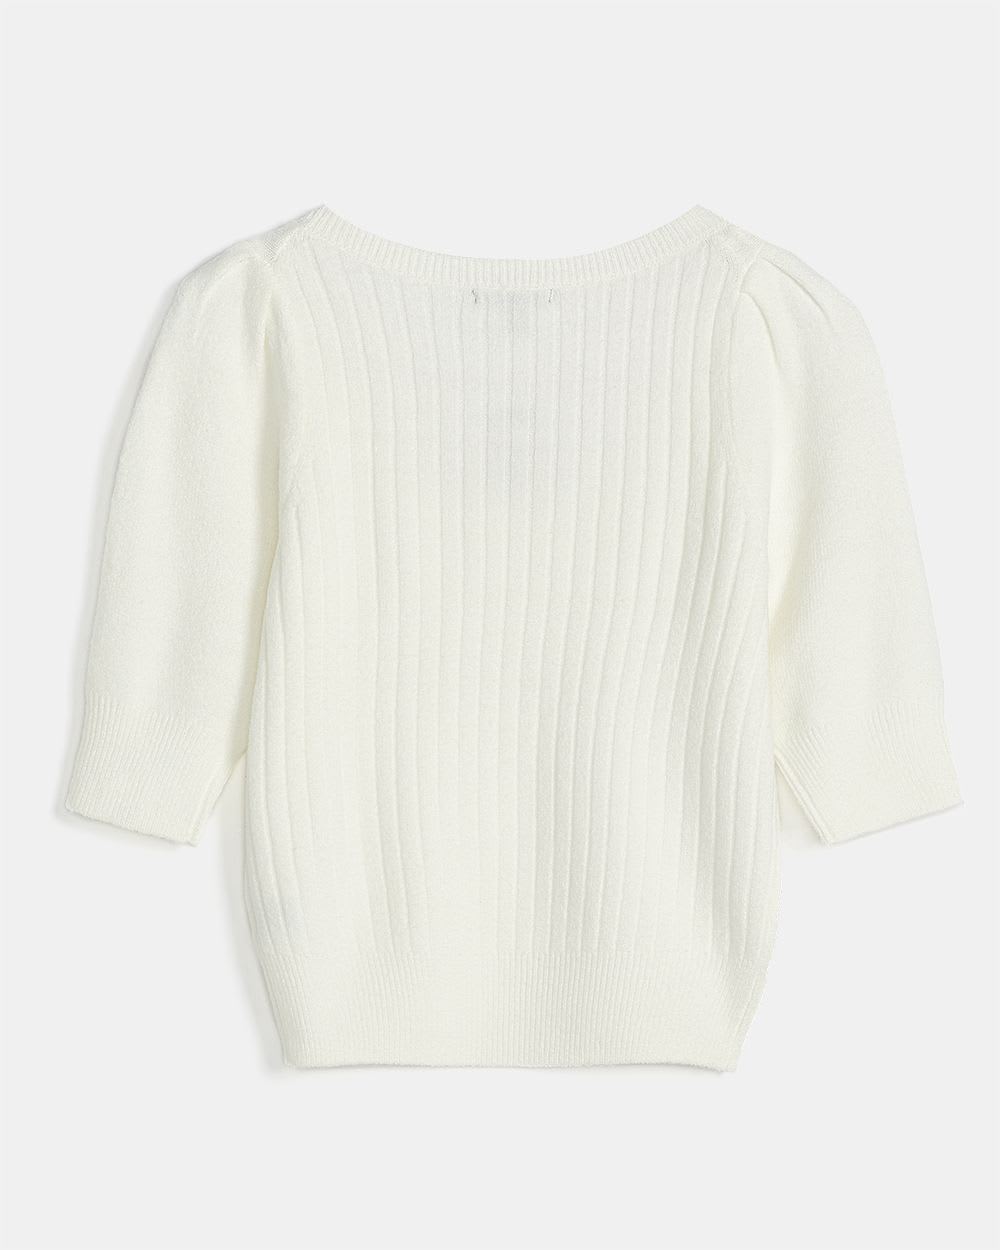 Square Neck Short-Sleeve Knit Pullover